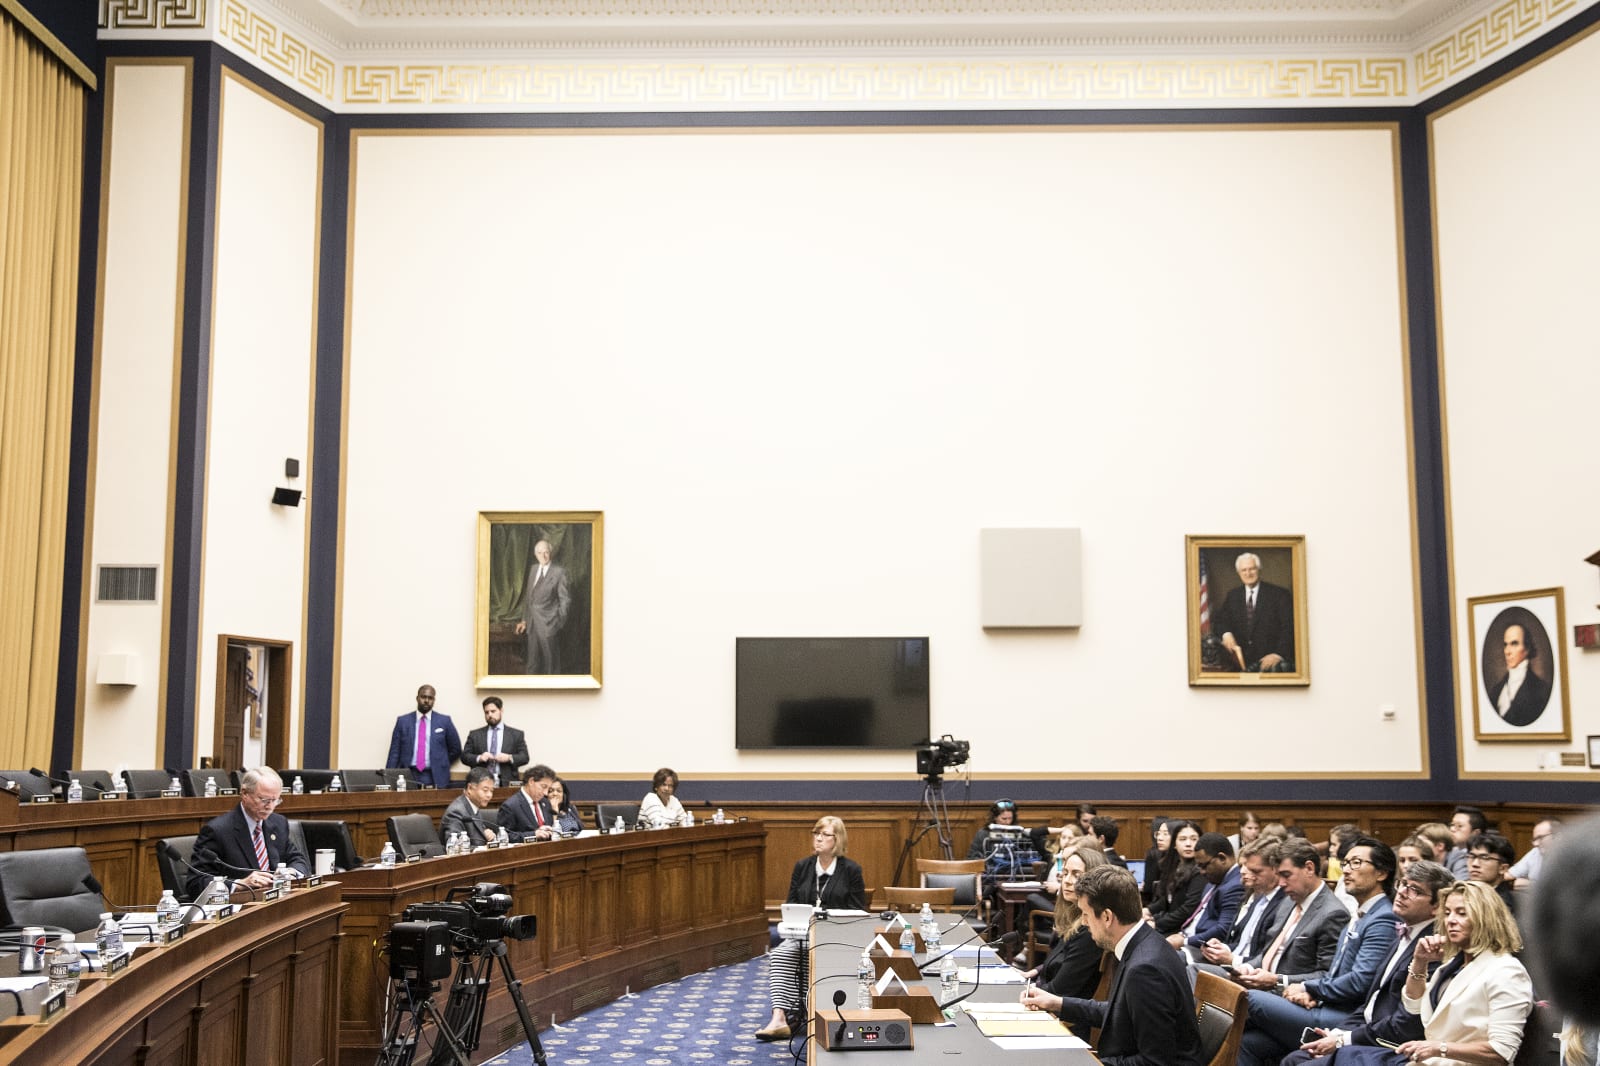 Facebook, Twitter, And Google Executives Testify To House Judiciary Committee On Content Filtering Practices